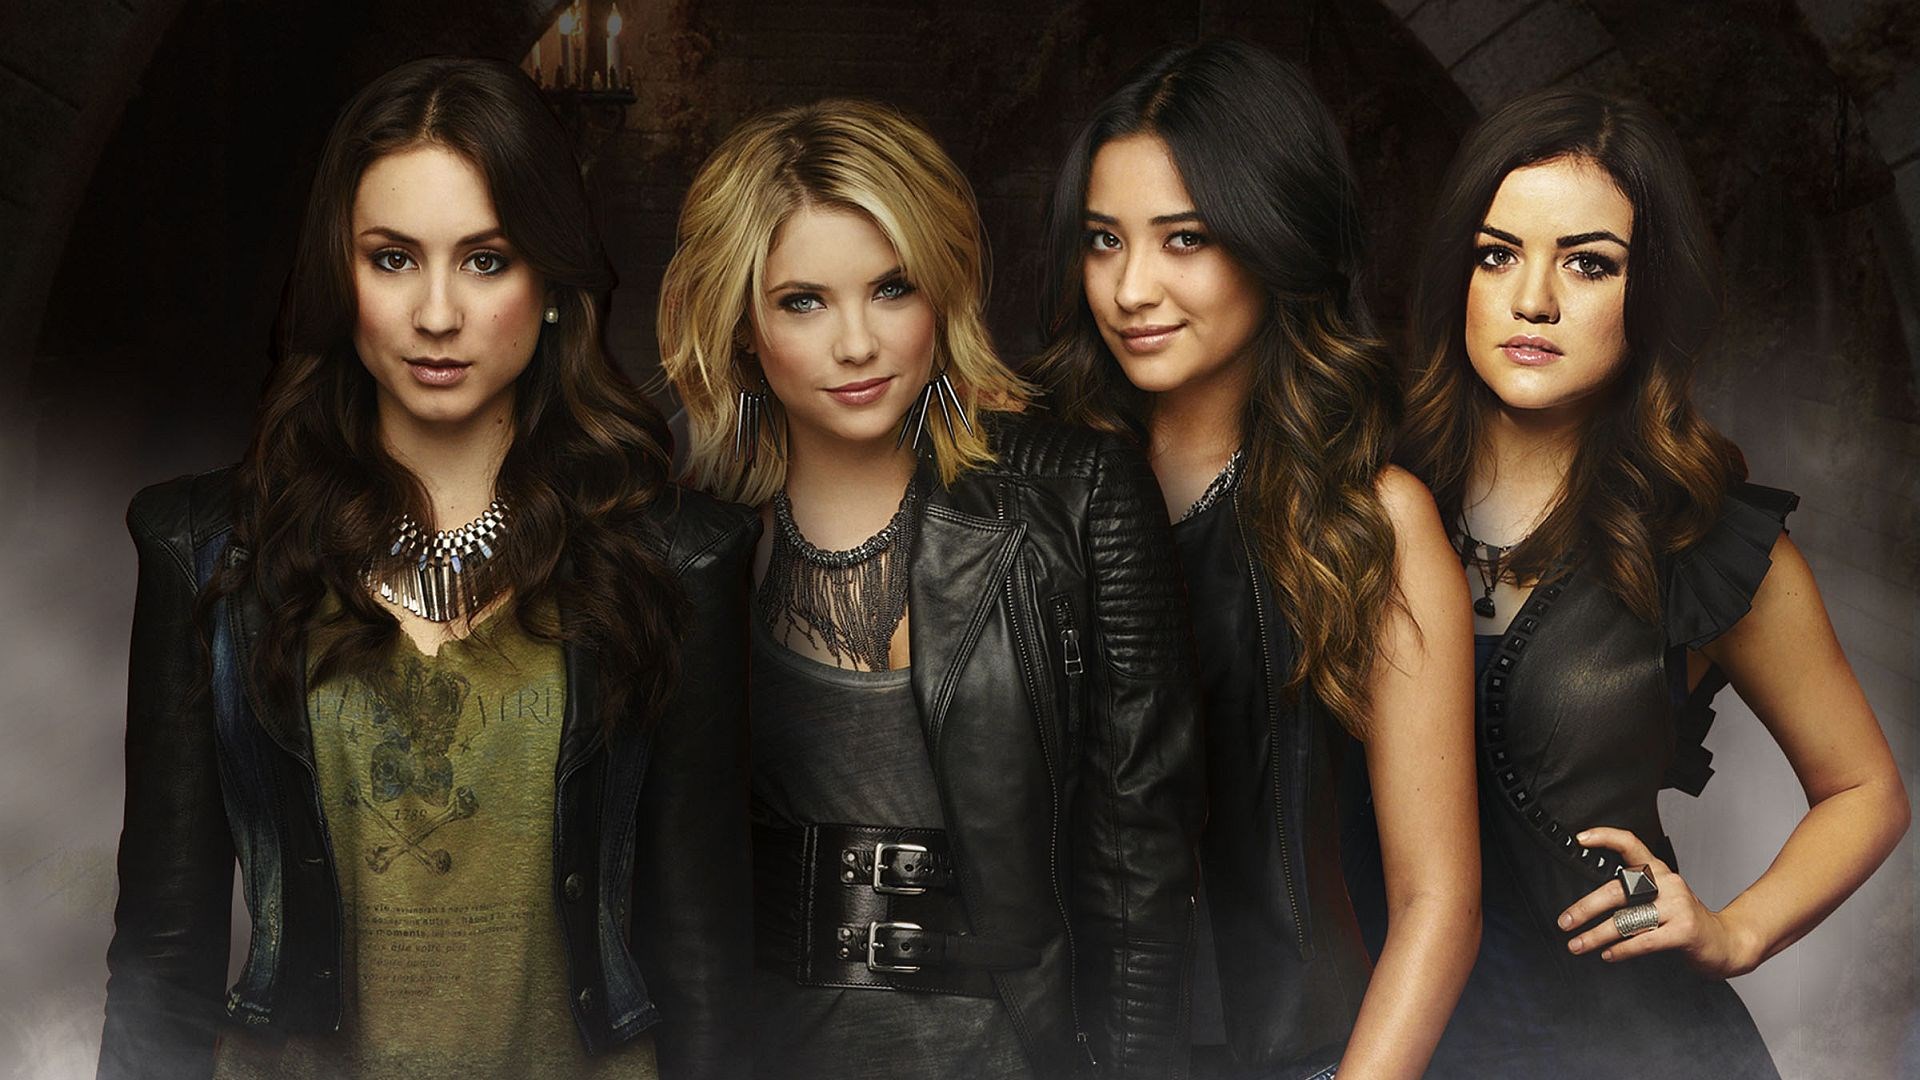 Pretty Little Liars Wallpapers Widescreen To Download - Pretty Little Liars Folder Icon , HD Wallpaper & Backgrounds